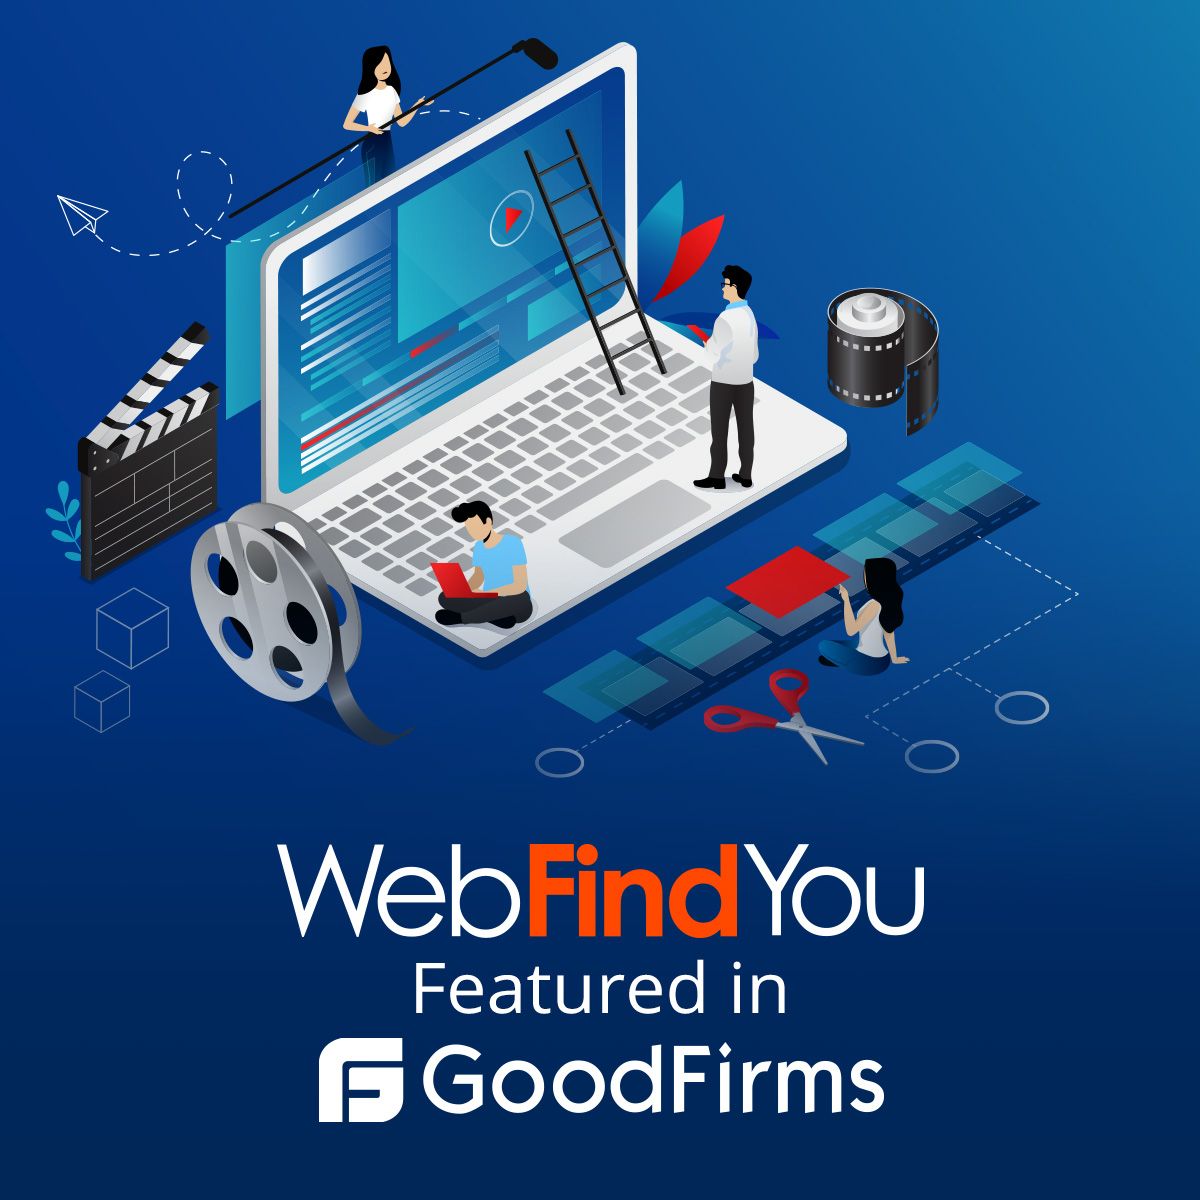 WebFindYou Featured in GoodFirms